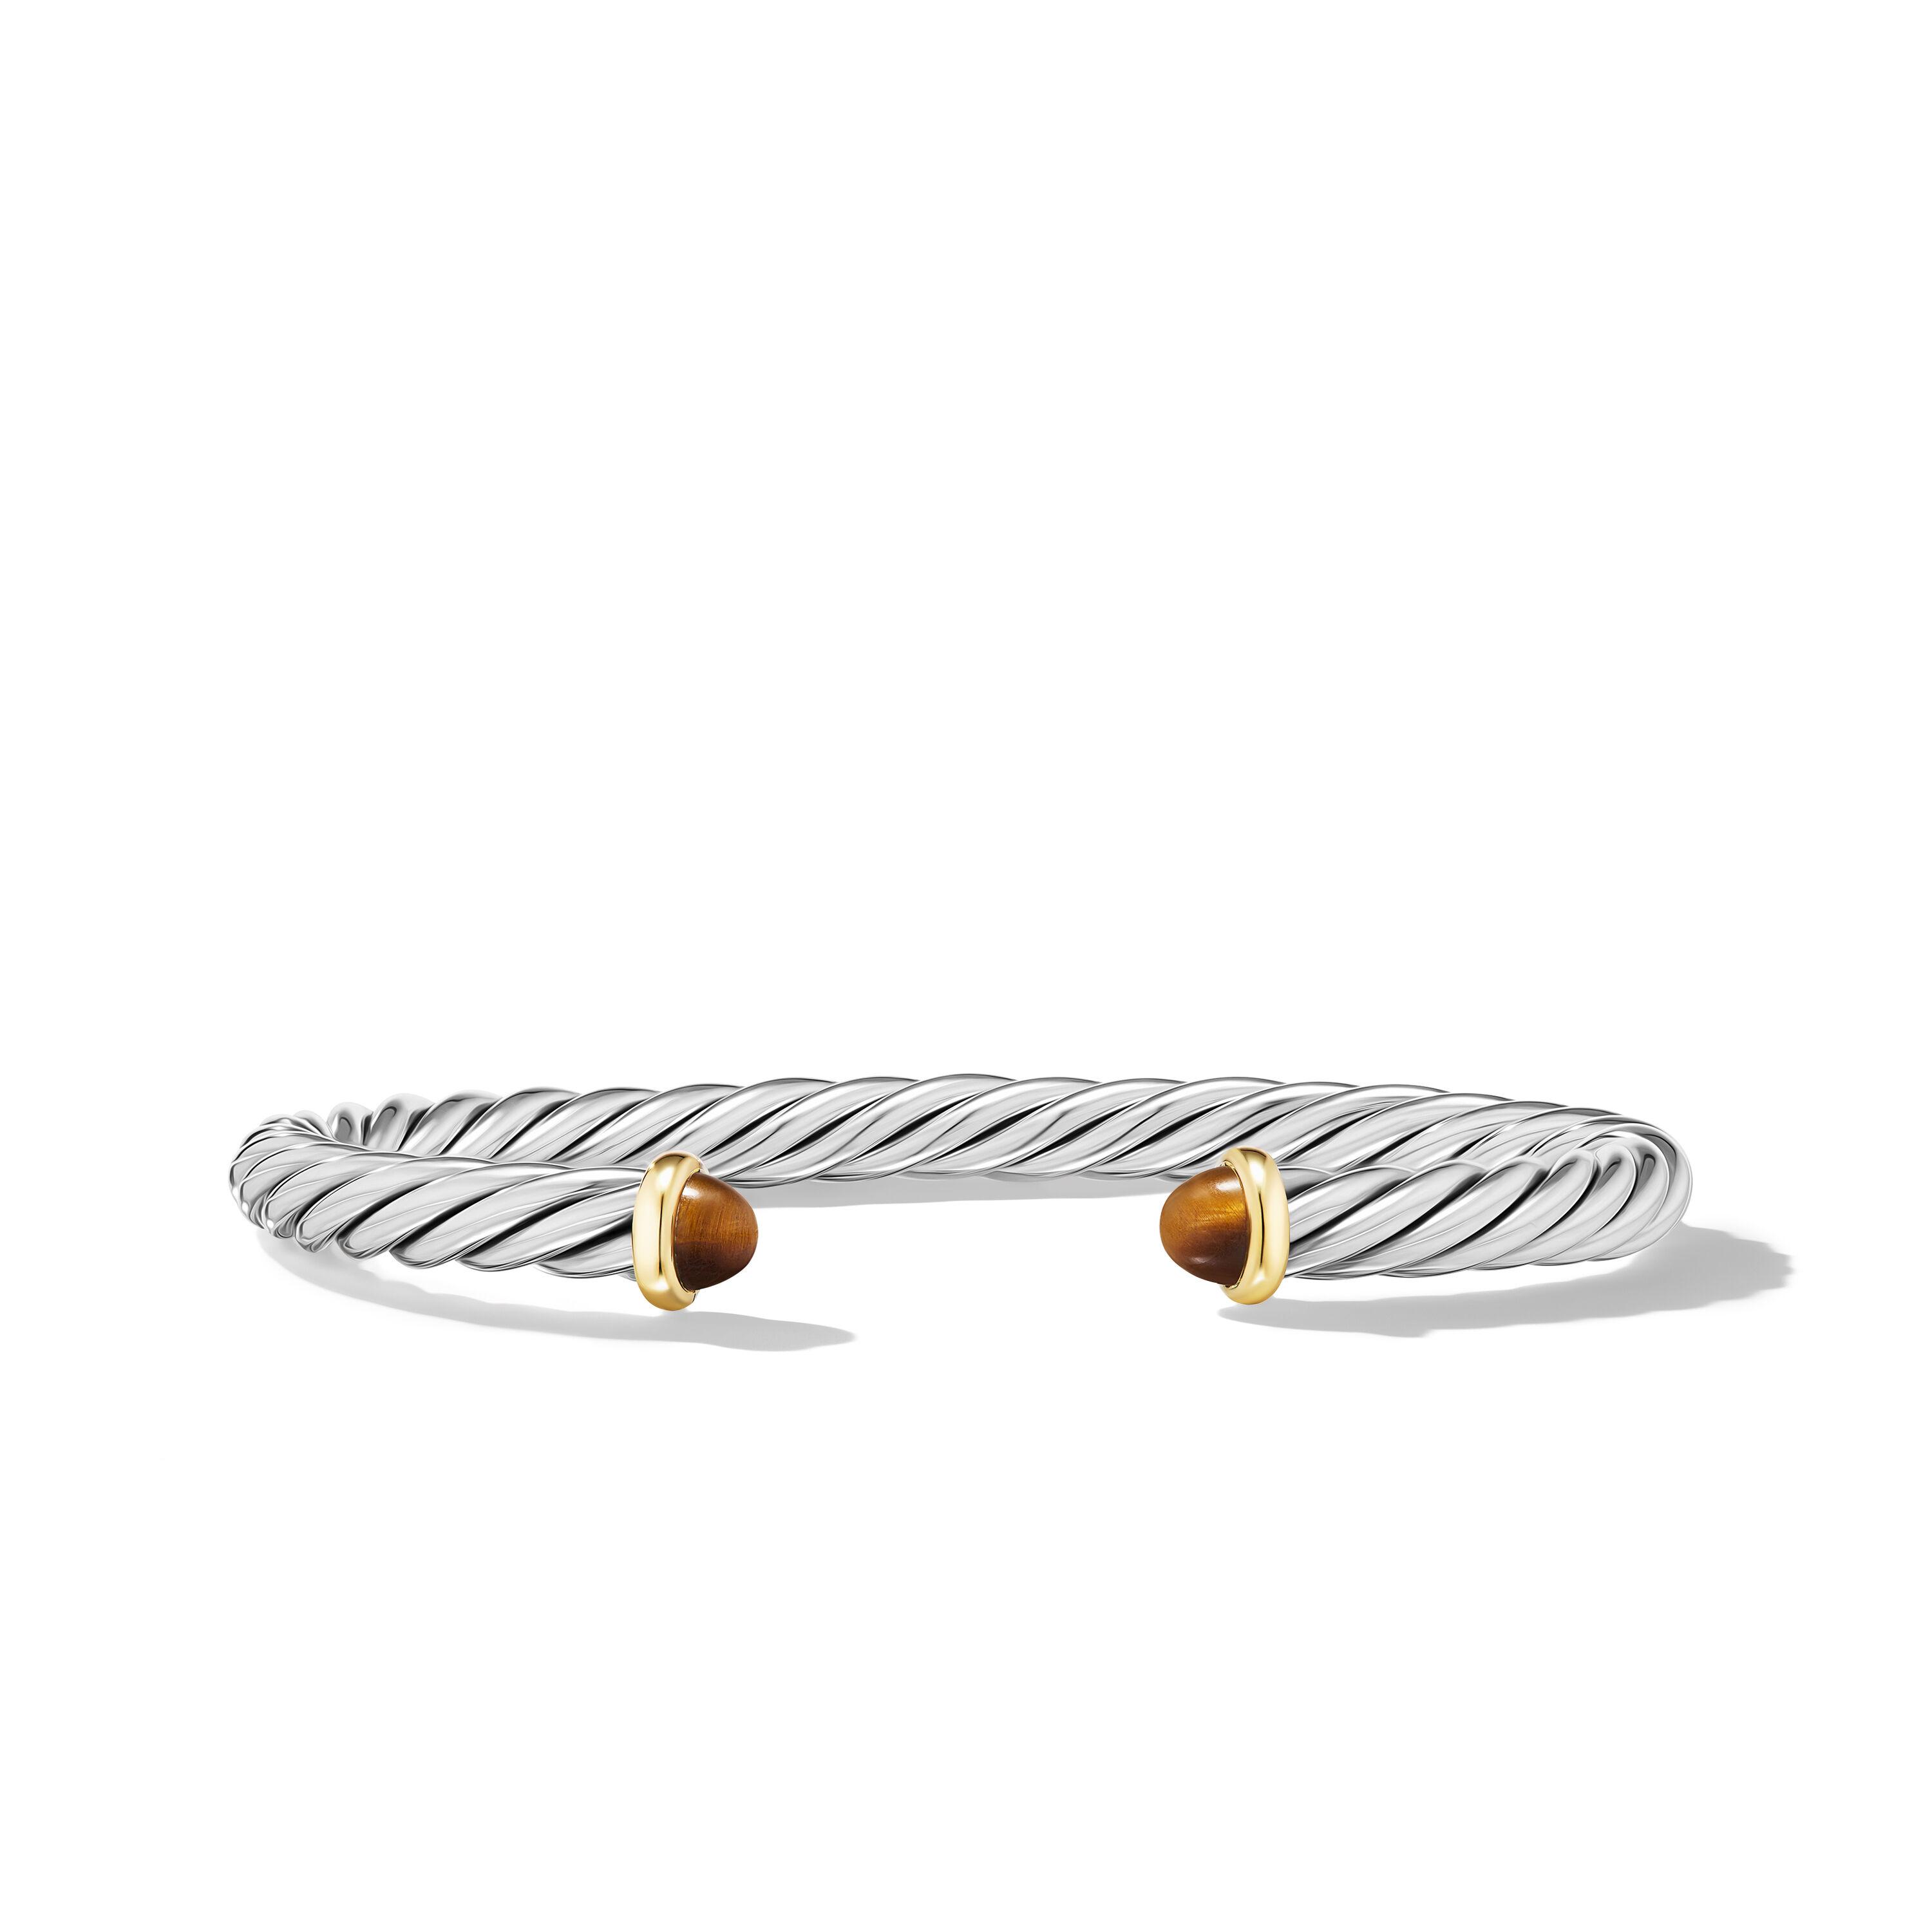 David Yurman 6mm Cable Cuff Bracelet in Sterling Silver with 14K Yellow Gold and Tiger's Eye, Medium